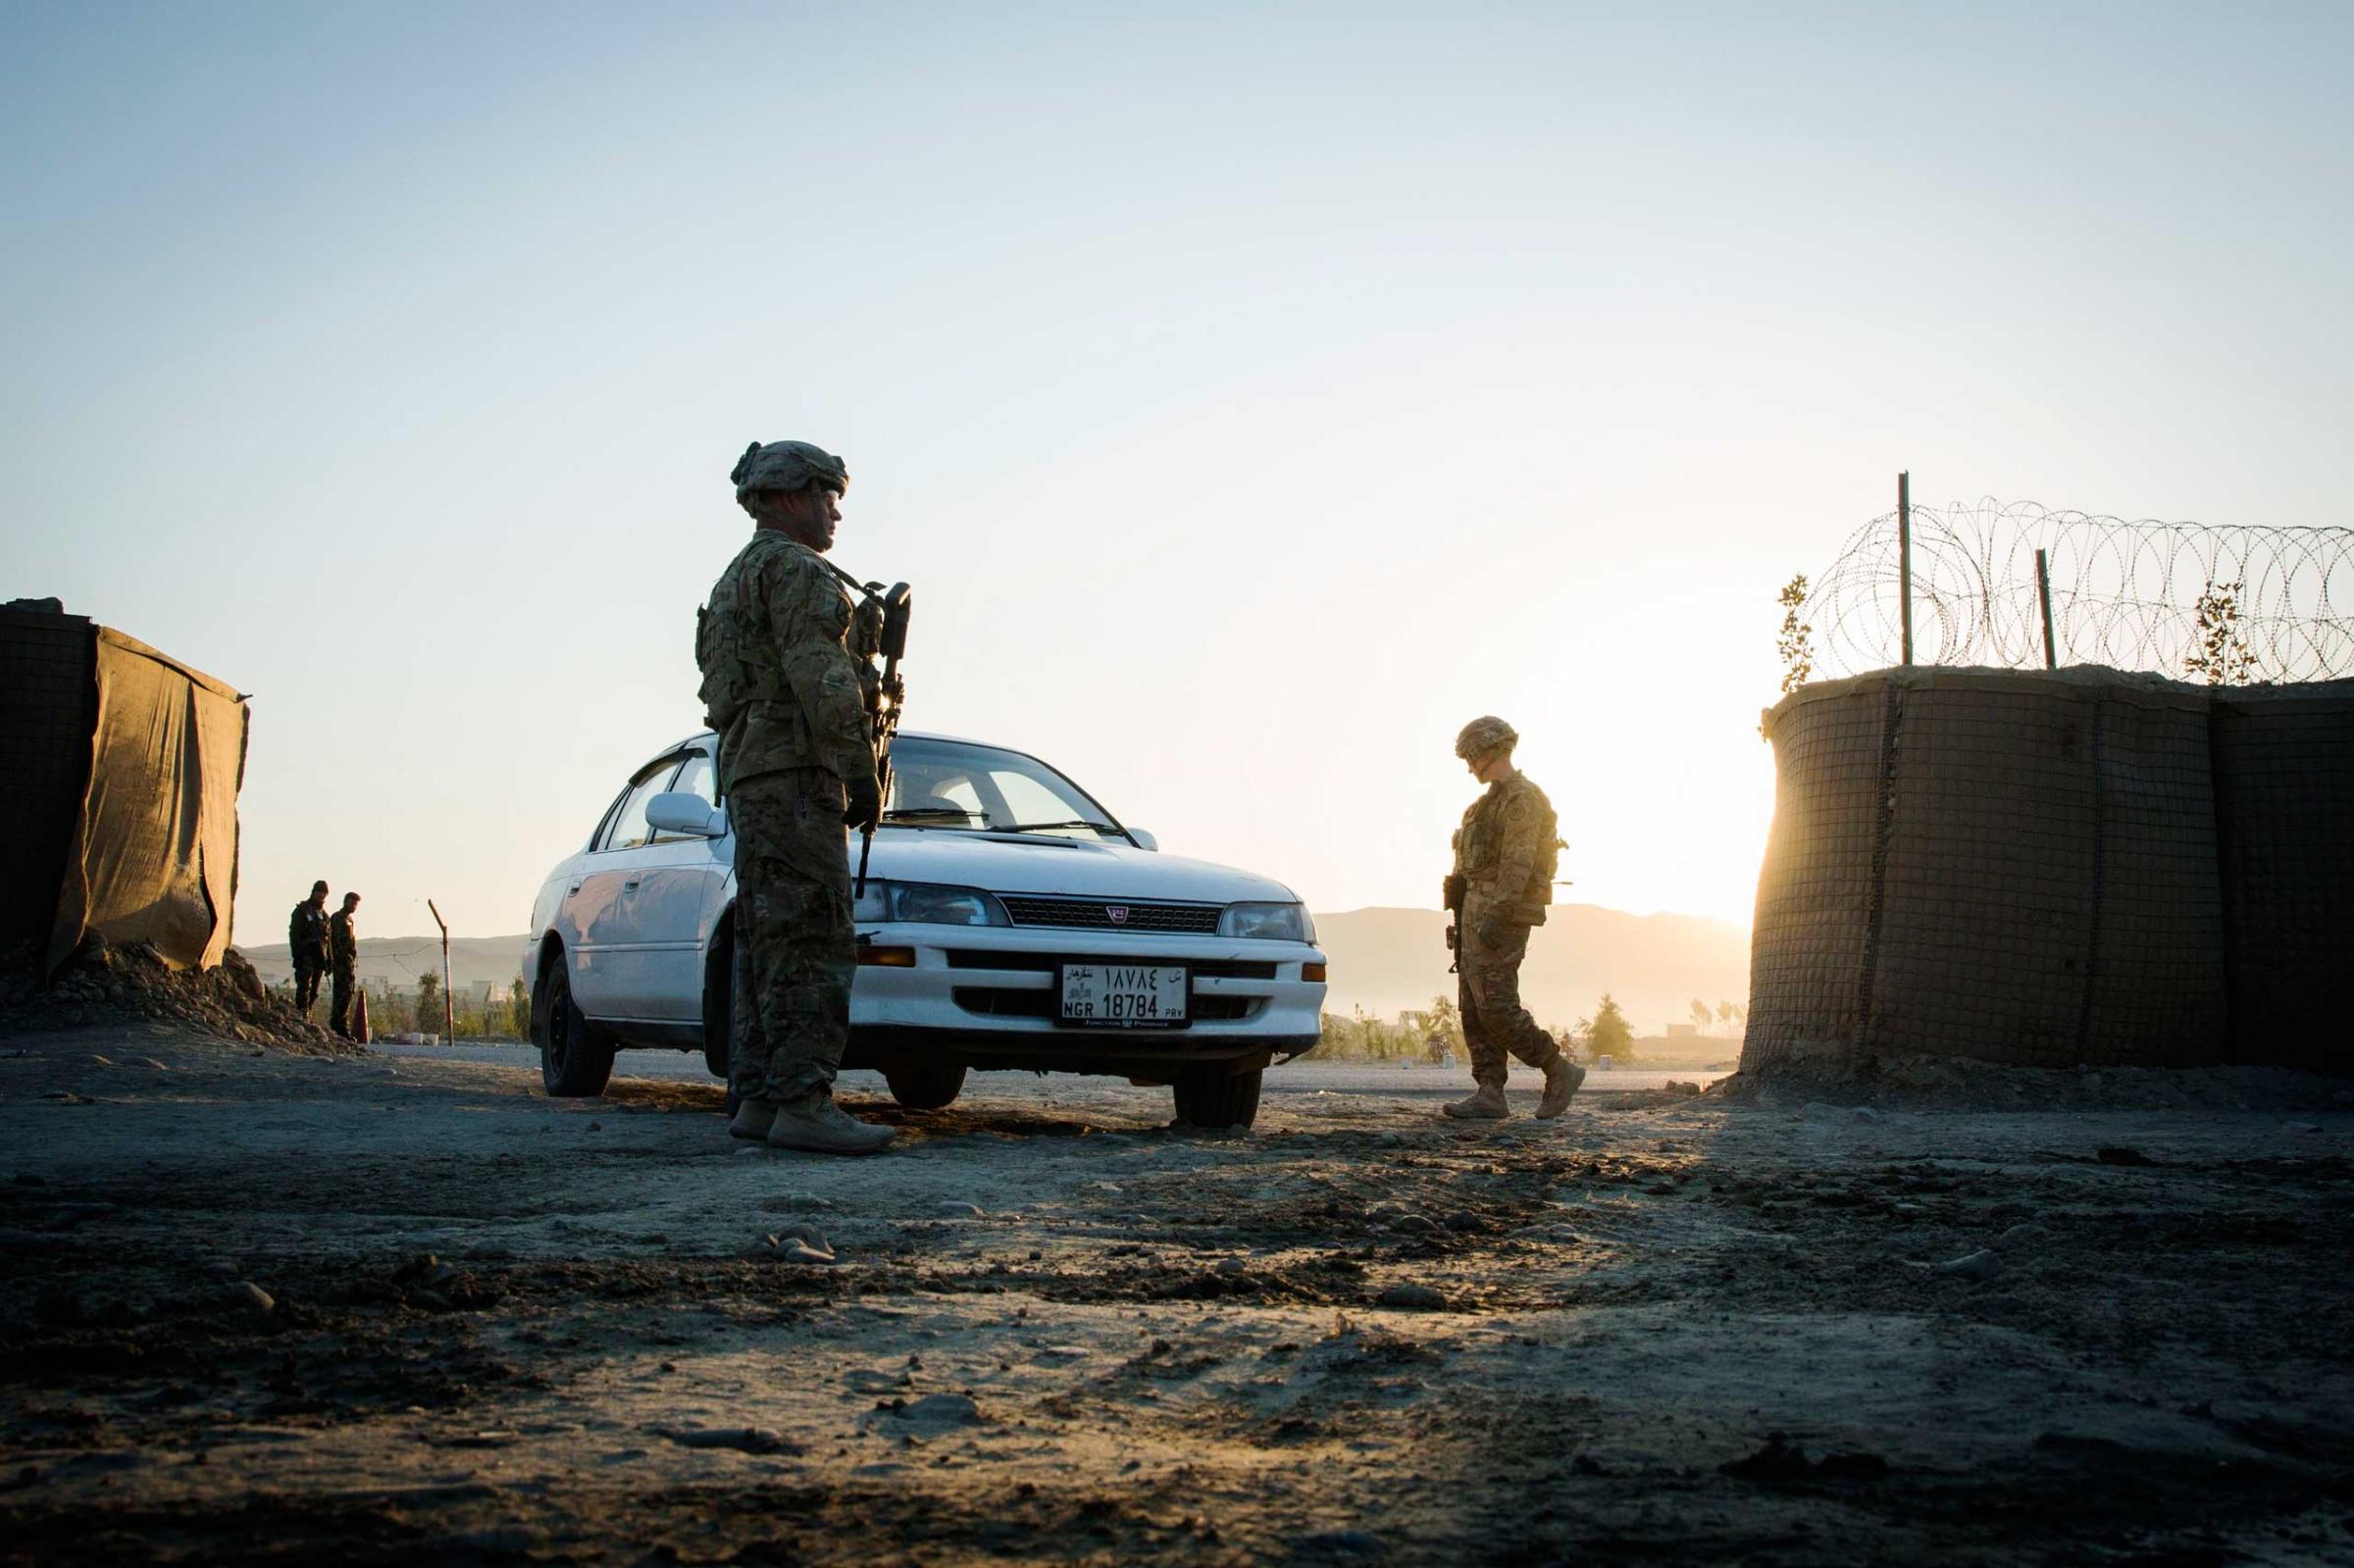 U.S. soldiers from 3rd Cavalry Regiment flag a car to stop to be screened for explosives near forward operating base Gamberi in the Laghman province of Afghanistan